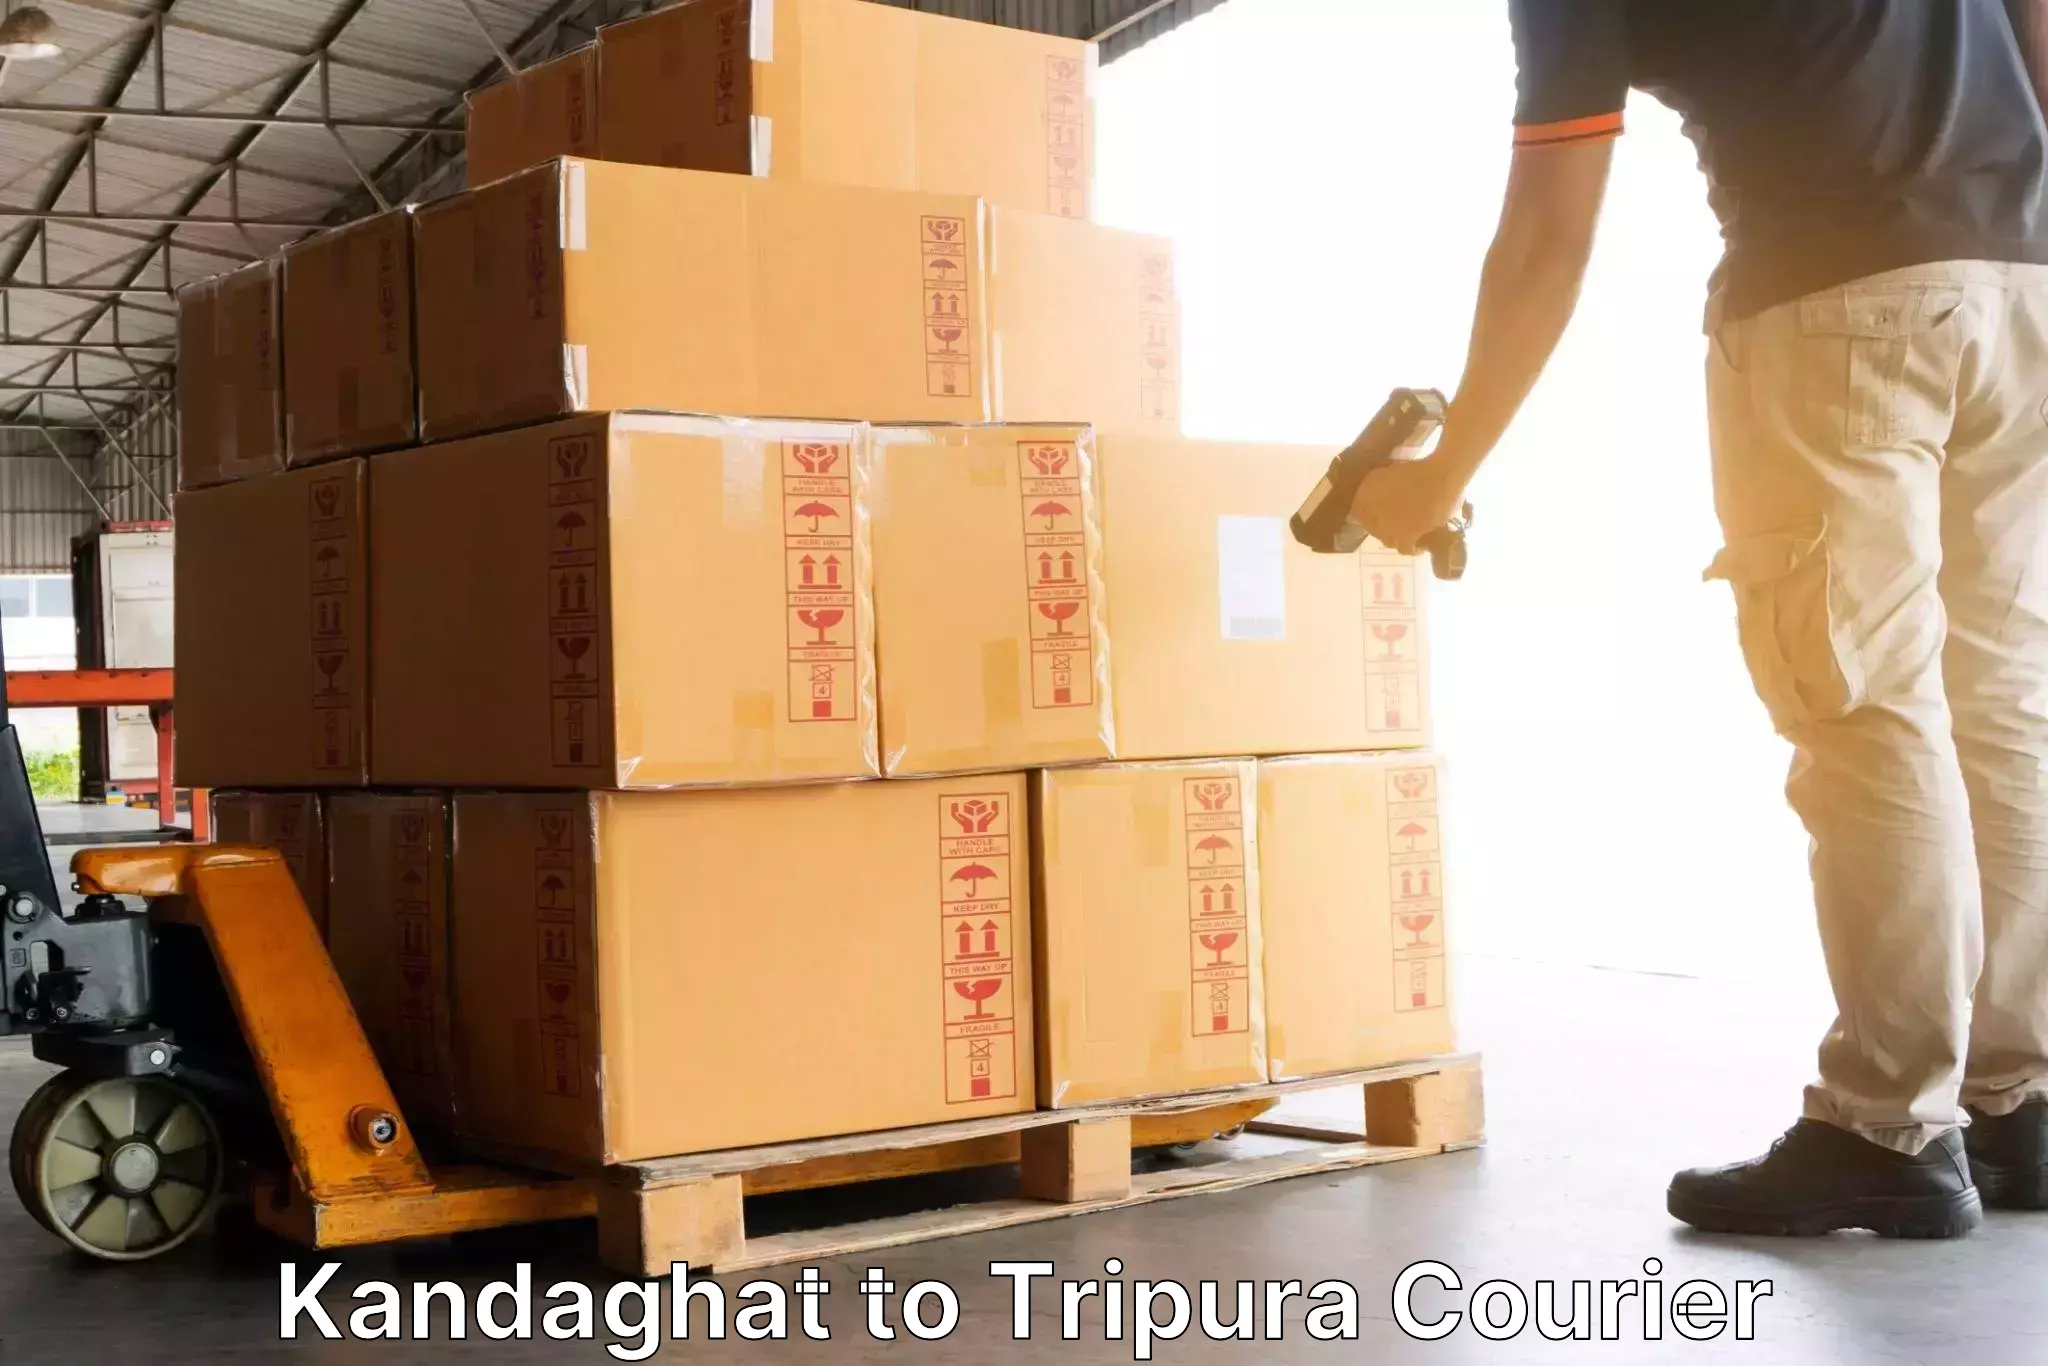 Customizable delivery plans Kandaghat to Dharmanagar